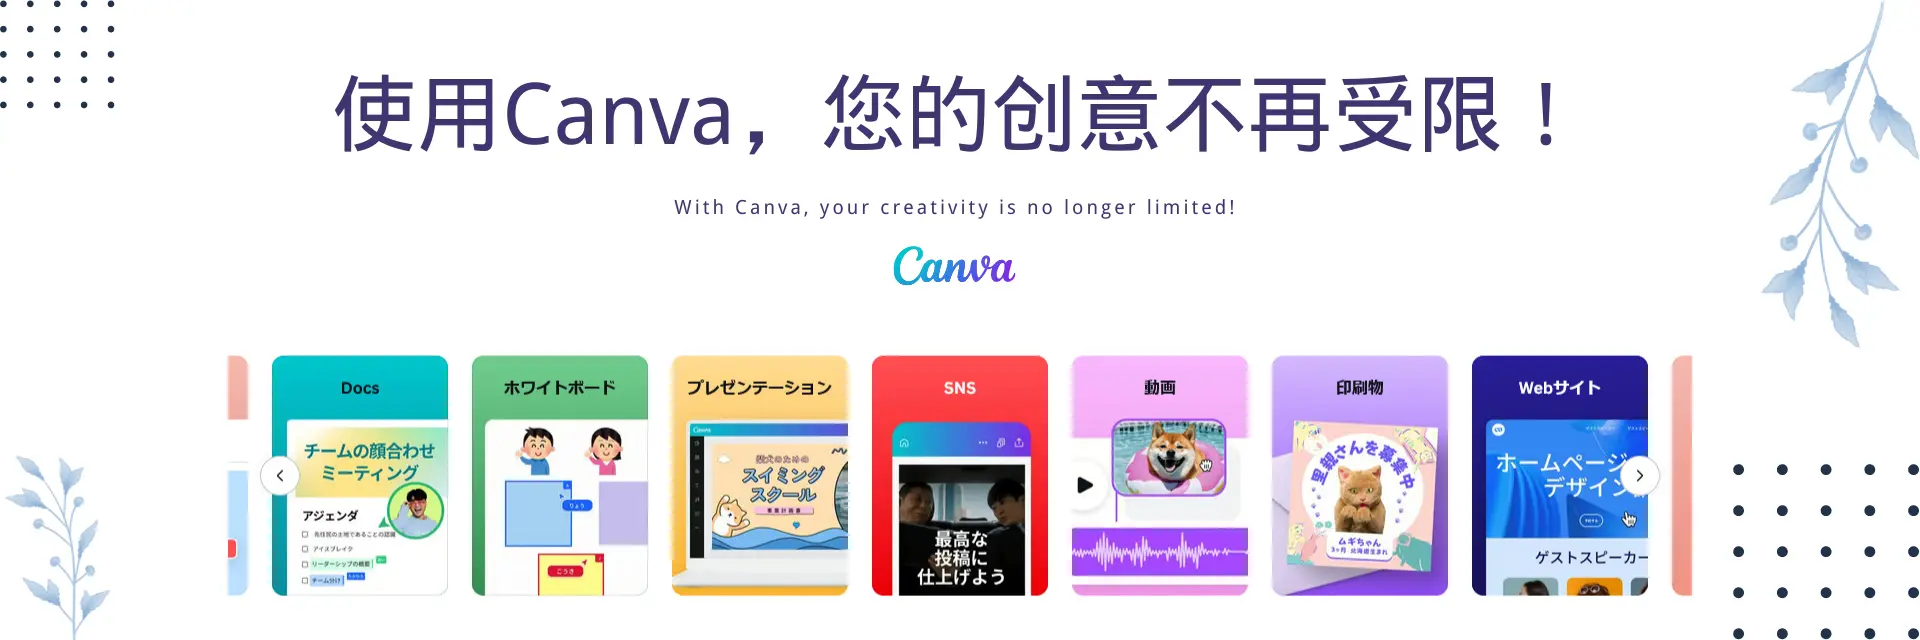 Canva page cover image (3)